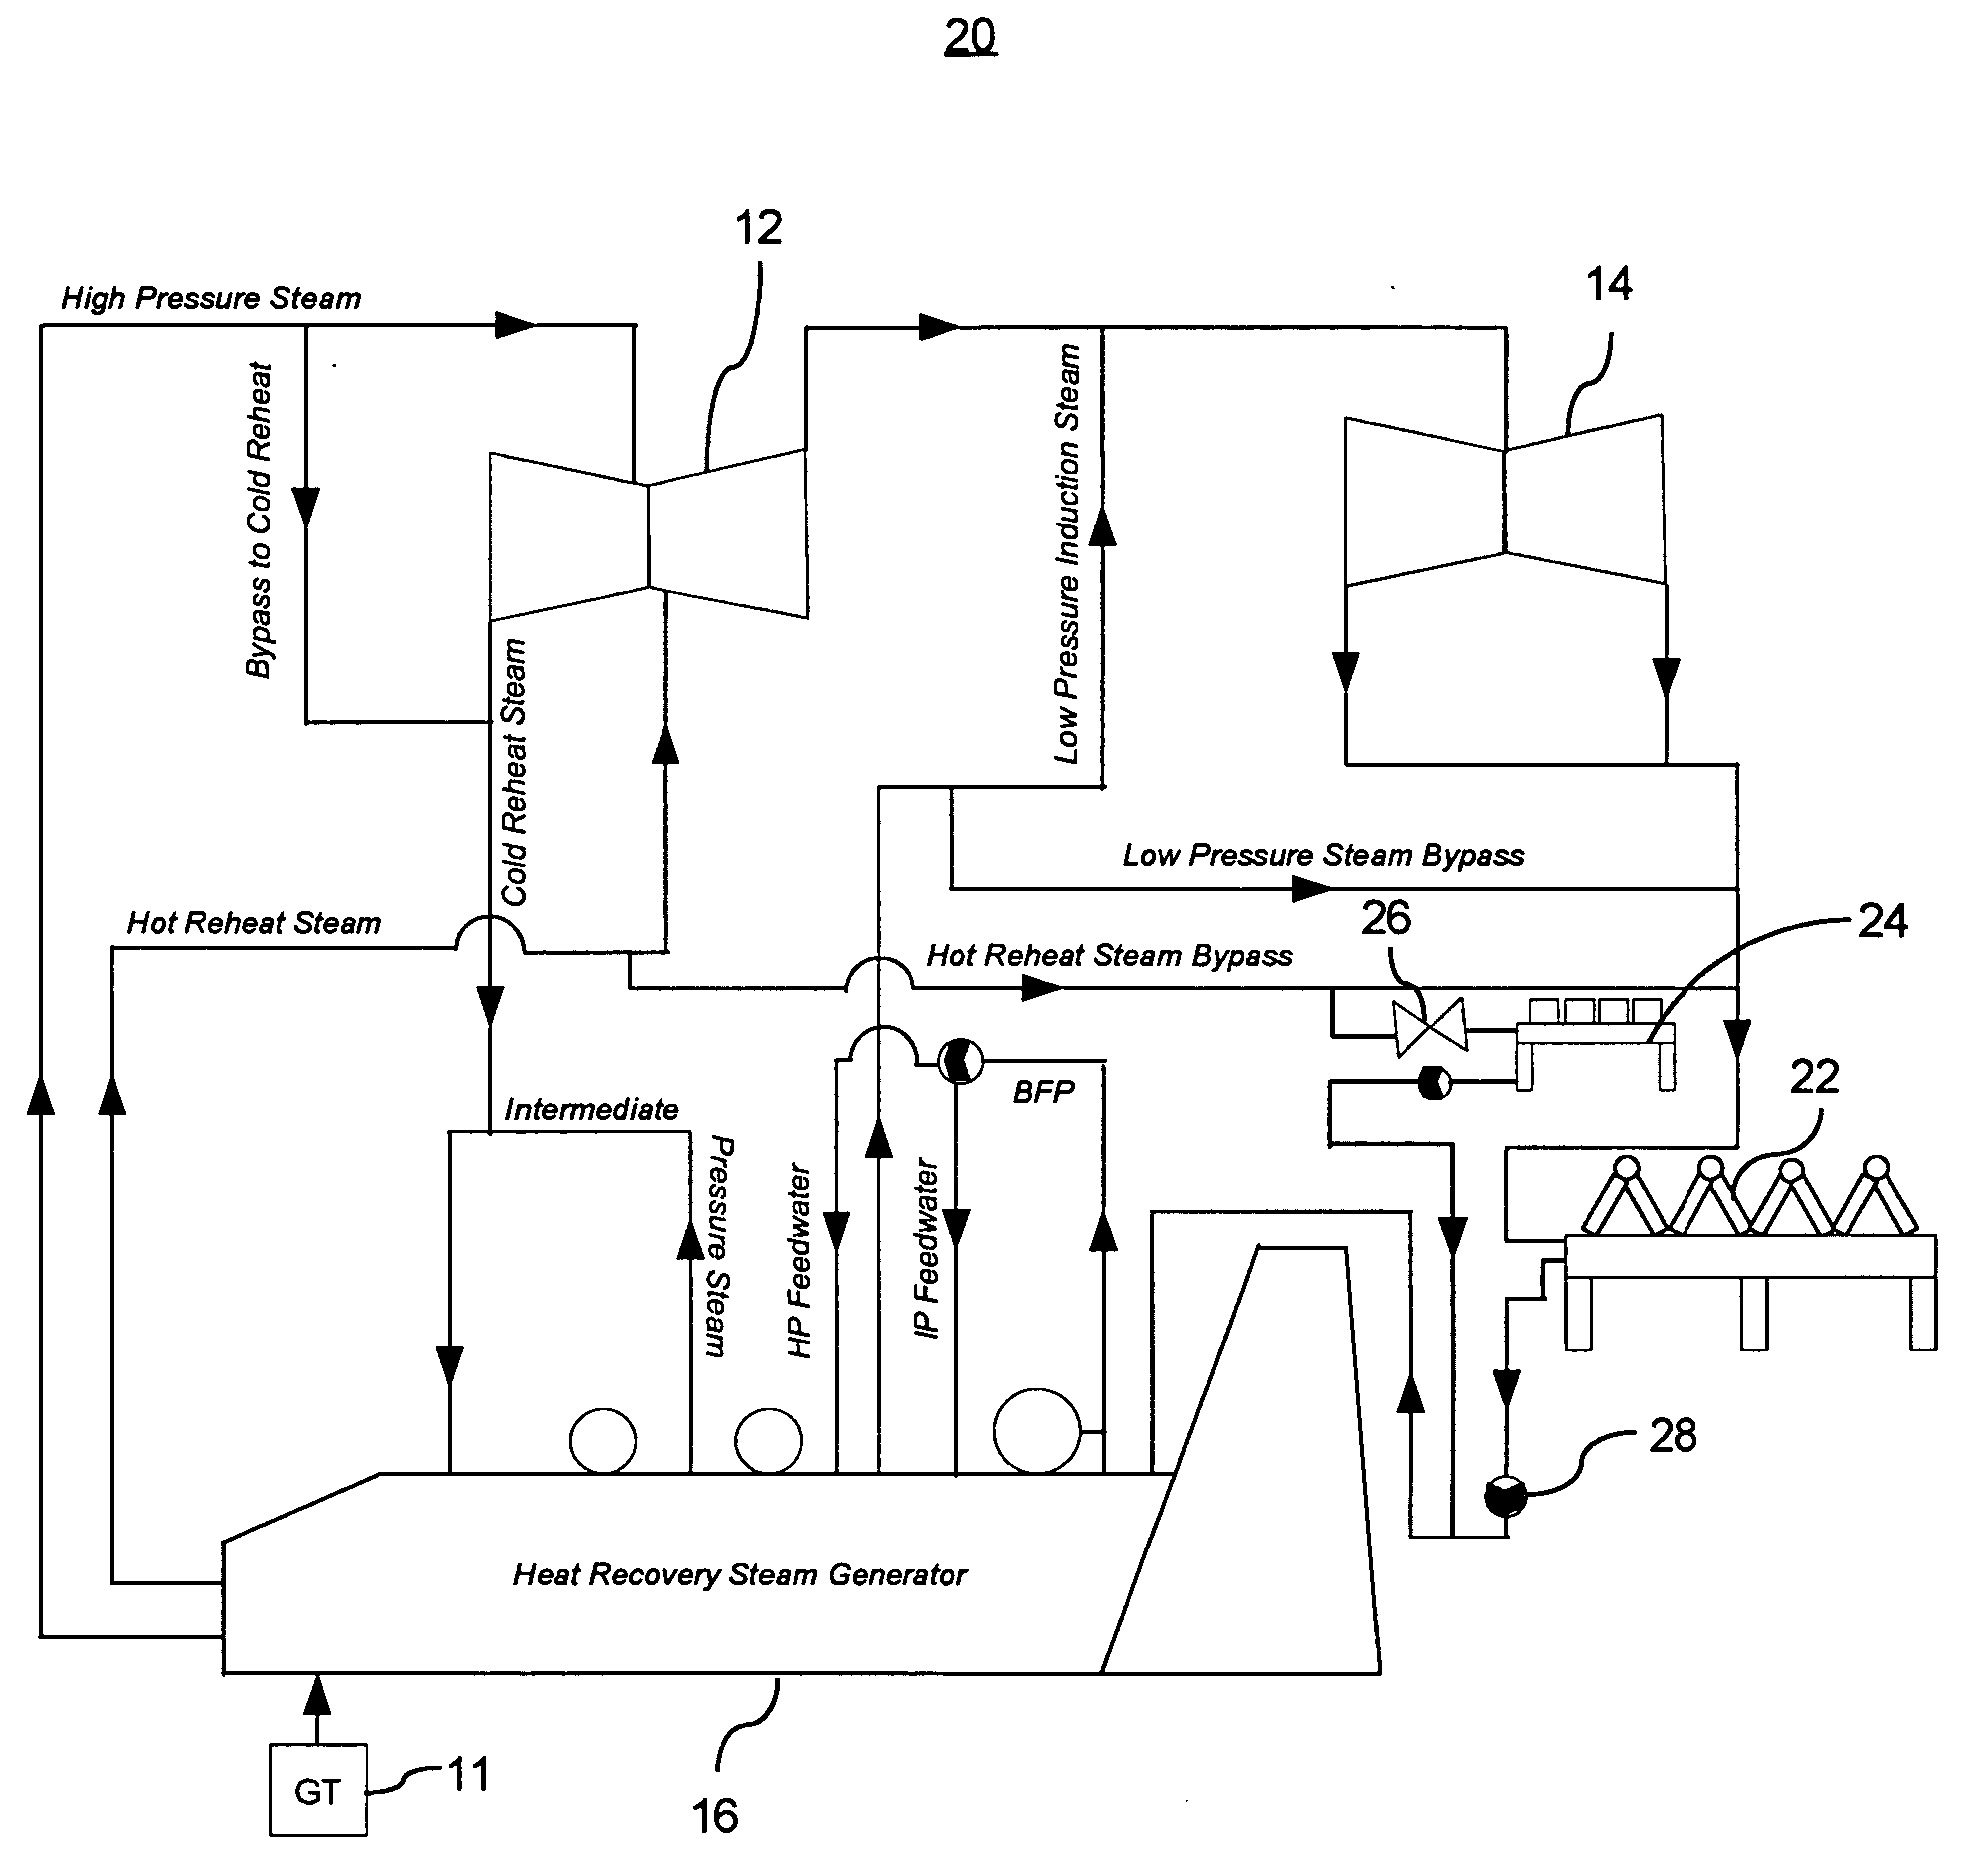 Combined cycle power plant with auxiliary air-cooled condenser